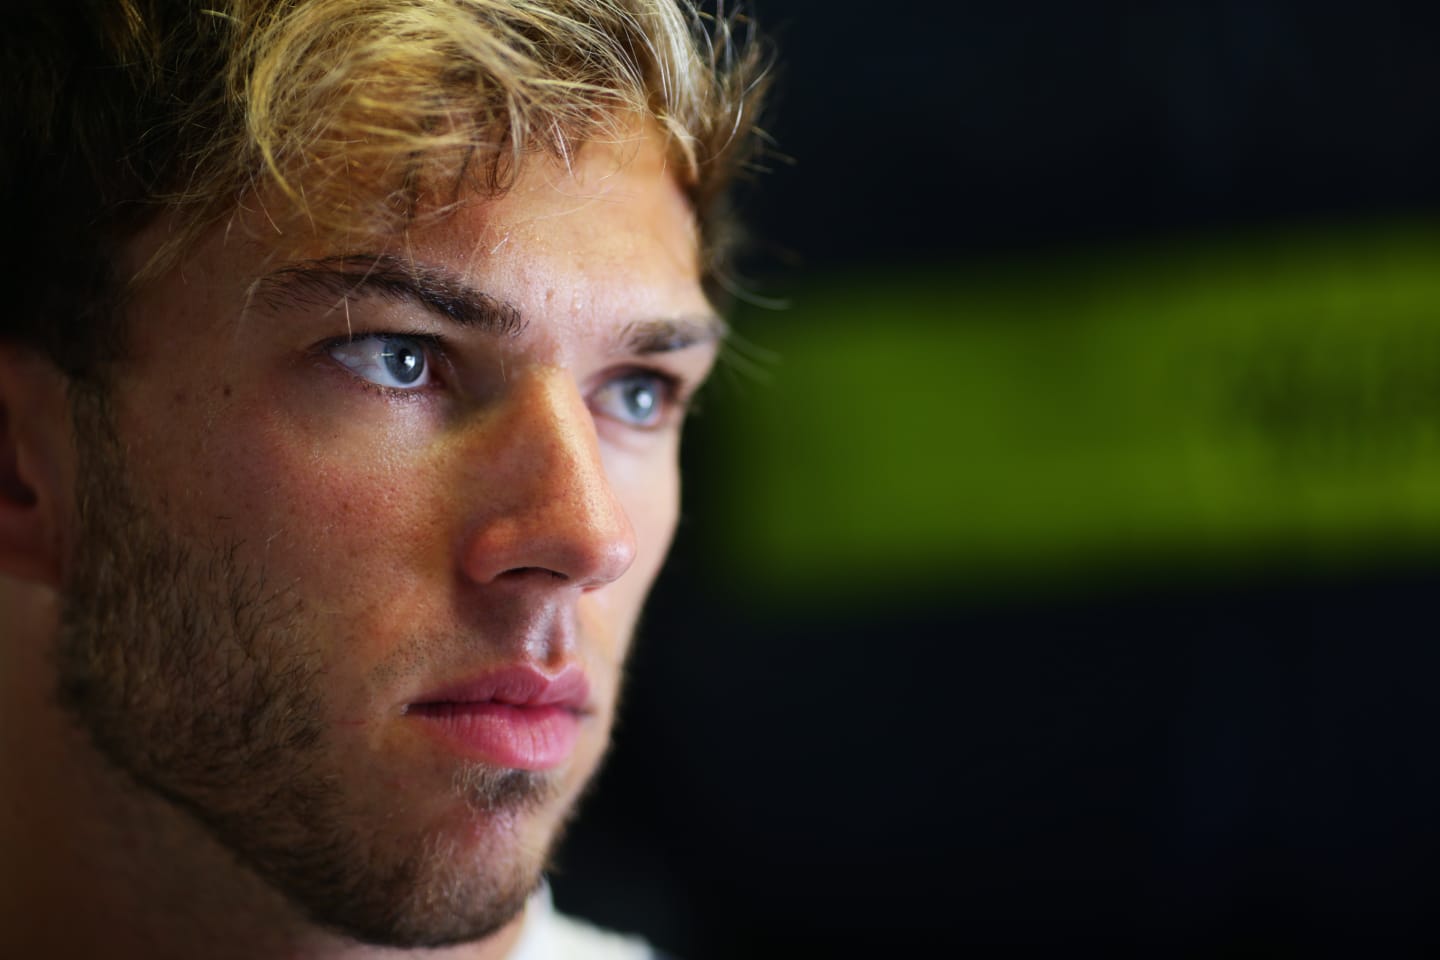 MONZA, ITALY - SEPTEMBER 04: Pierre Gasly of France and Scuderia AlphaTauri looks on in the garage during practice for the F1 Grand Prix of Italy at Autodromo di Monza on September 04, 2020 in Monza, Italy. (Photo by Peter Fox/Getty Images)